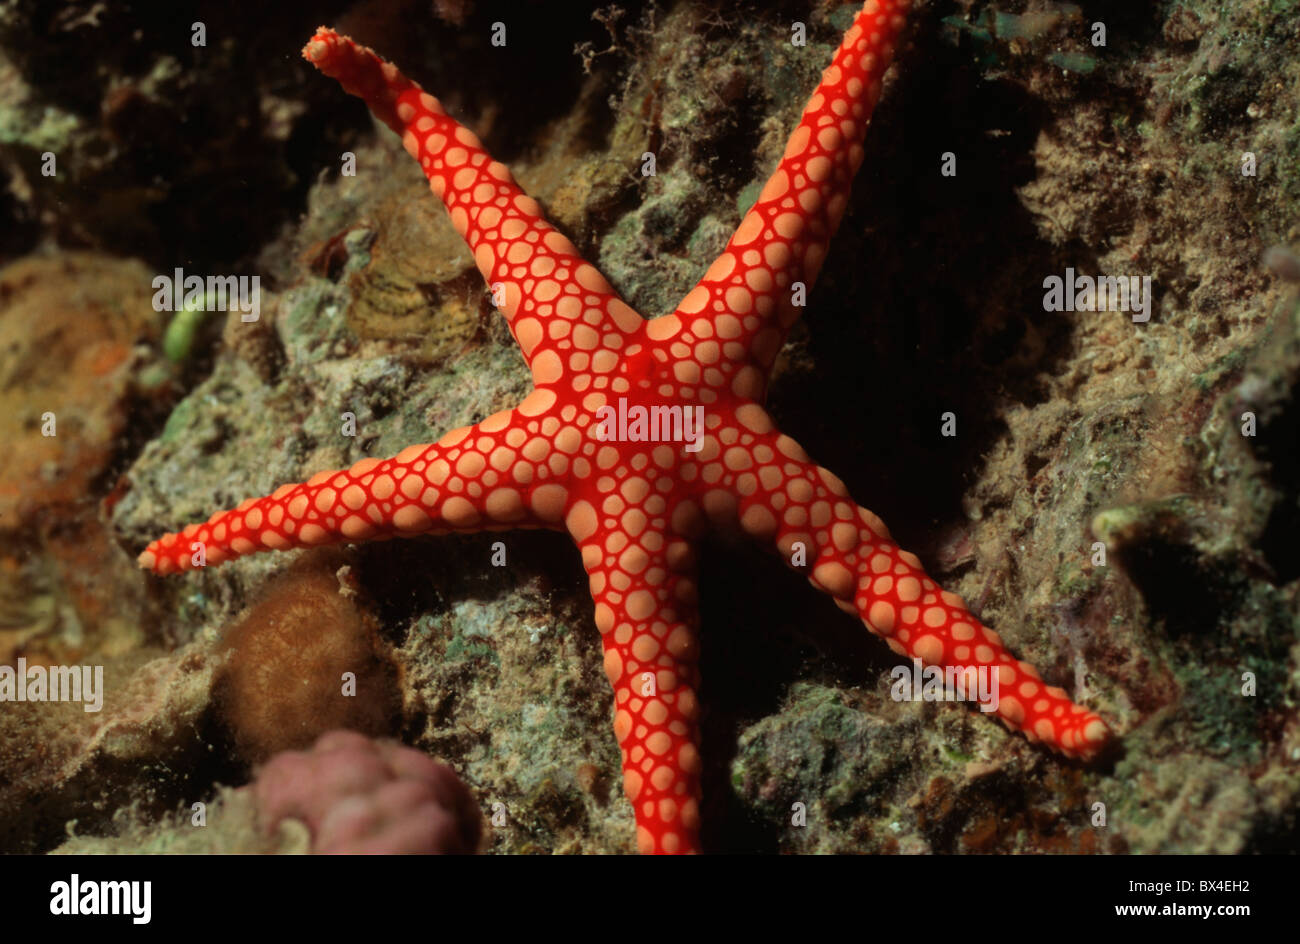 Asteroidea fauna fish Fromia monilis coral reefs marine fishes nature oceans red mesh star Red Sea starfishe Stock Photo